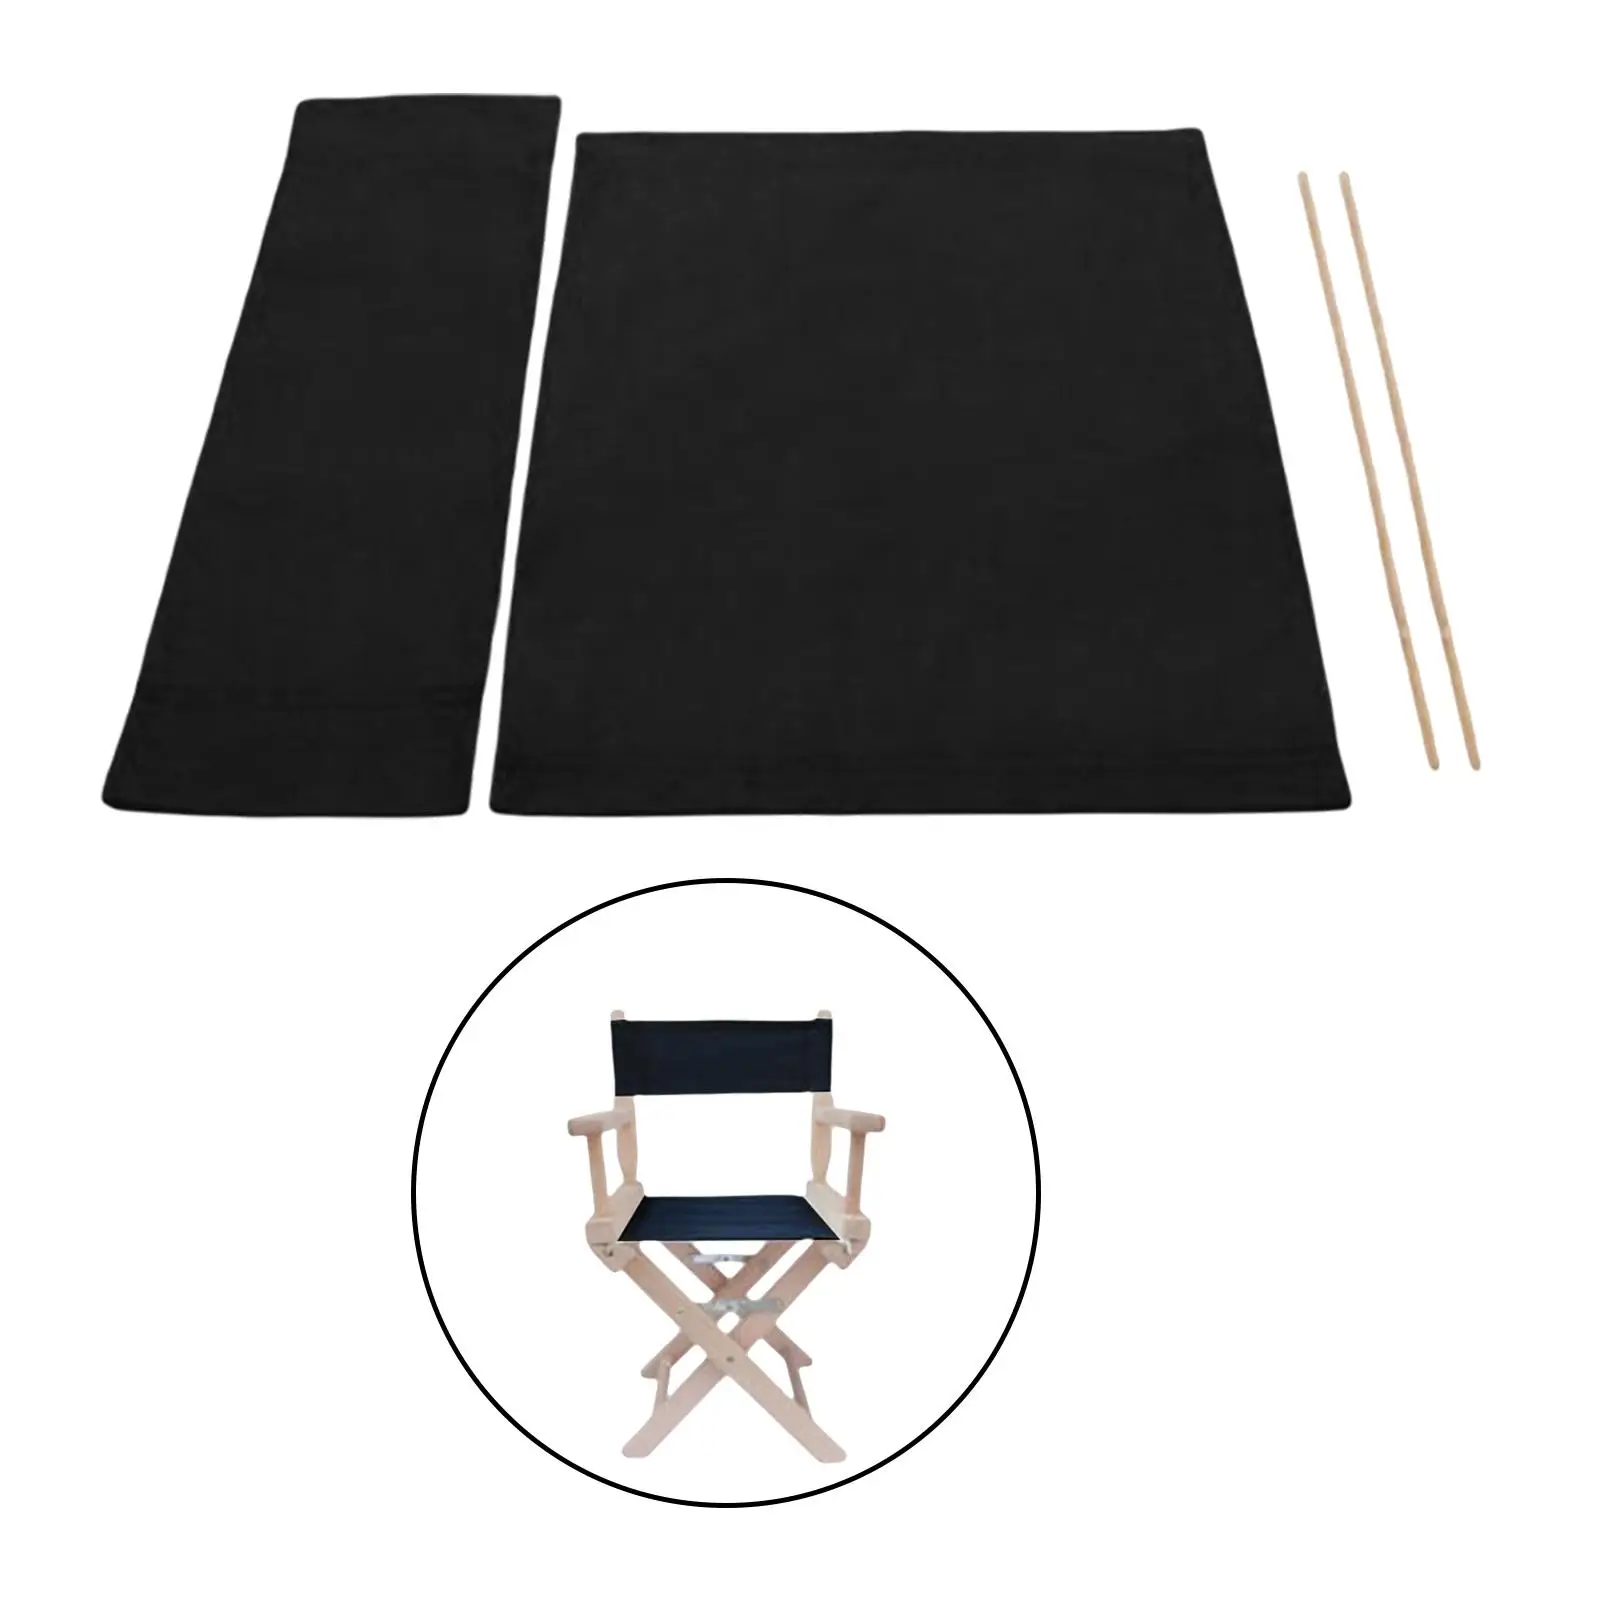 Outdoor Directors Chairs Cover Machine Washable with Seat and Back Furniture Seat Chair Covers for Movie Chair